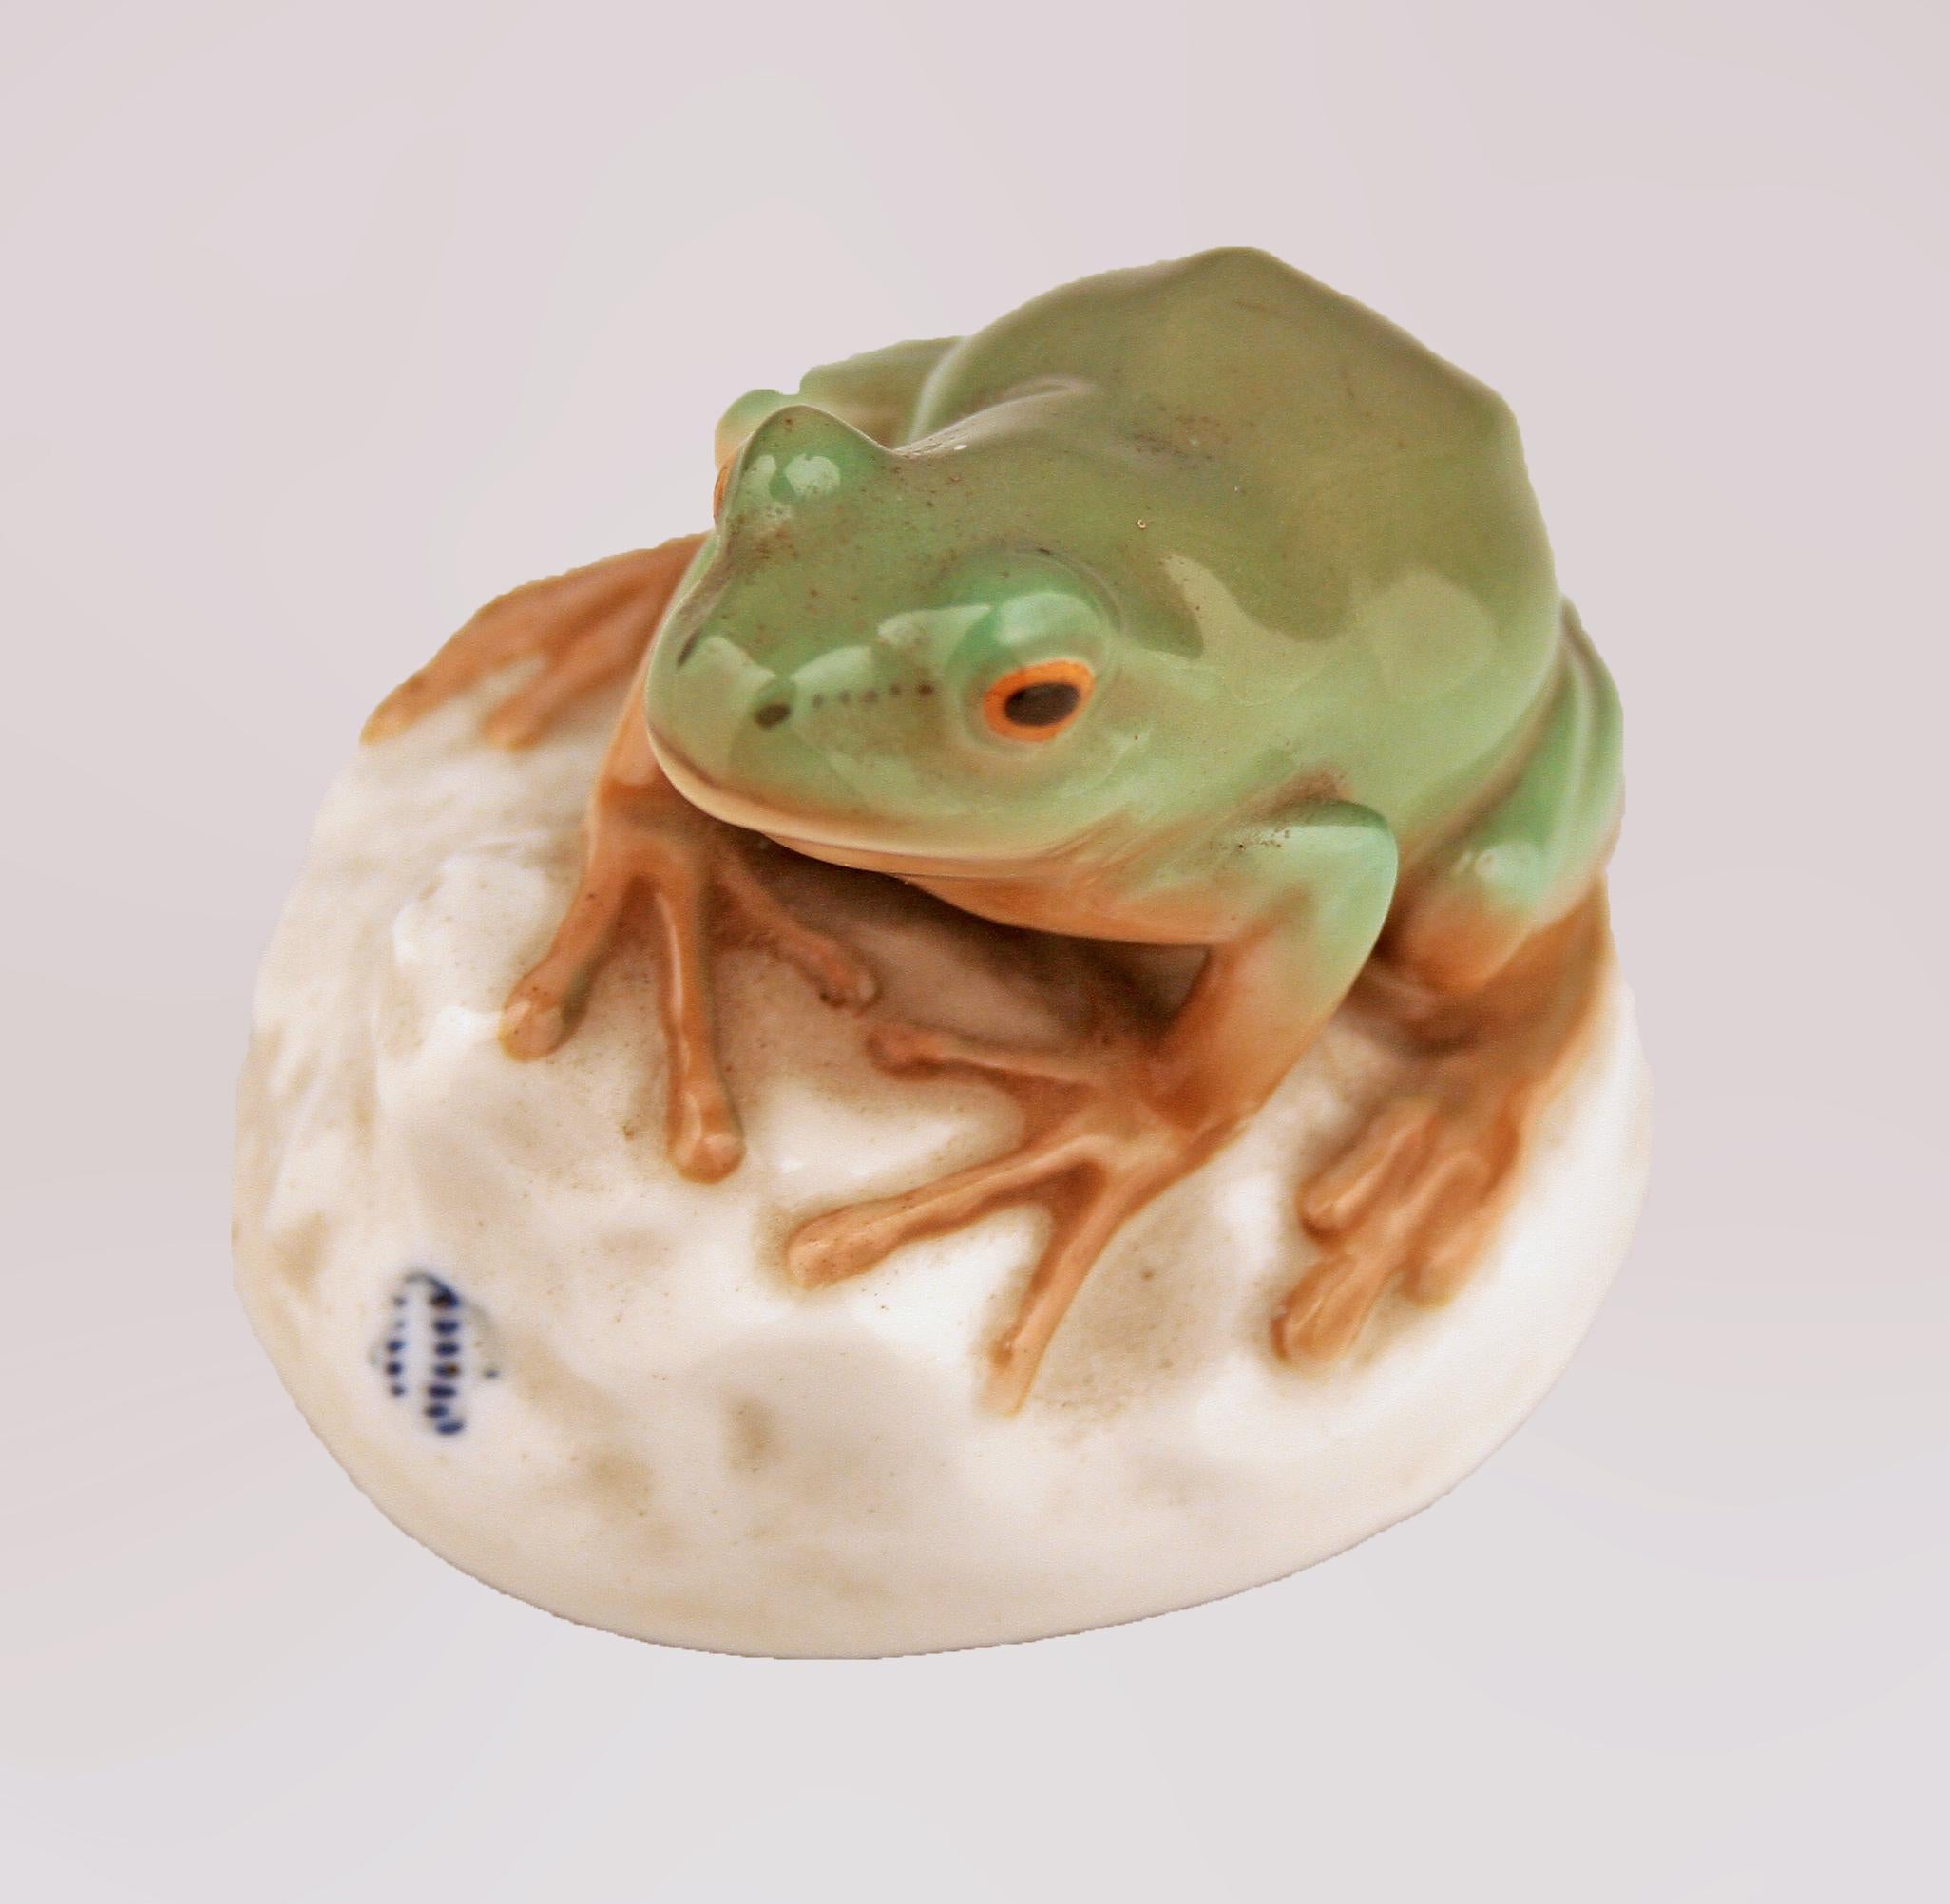 Ceramic Mid-20th Century Modern German Glazed and Painted Porcelain Frog by Nymphenburg For Sale